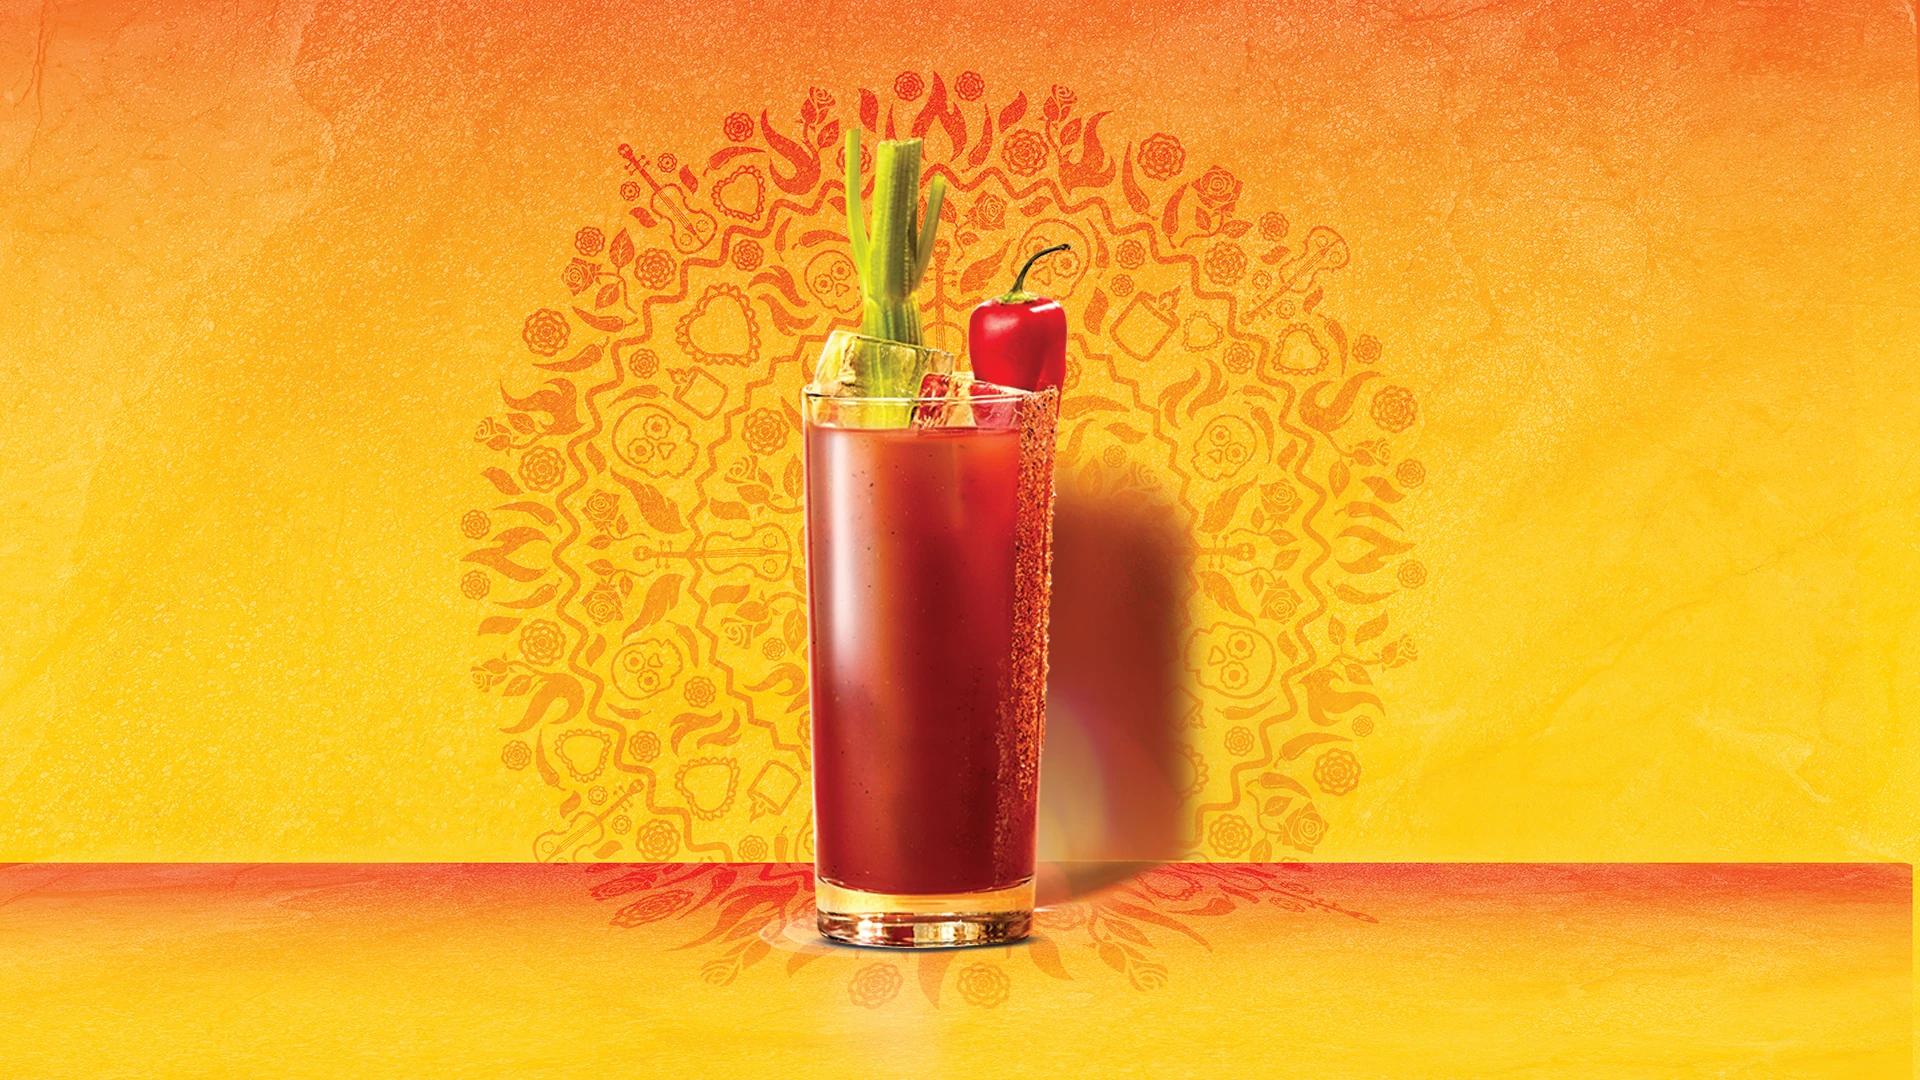 Smirnoff Bloody Caesar on a yellow, red and purple aztec background